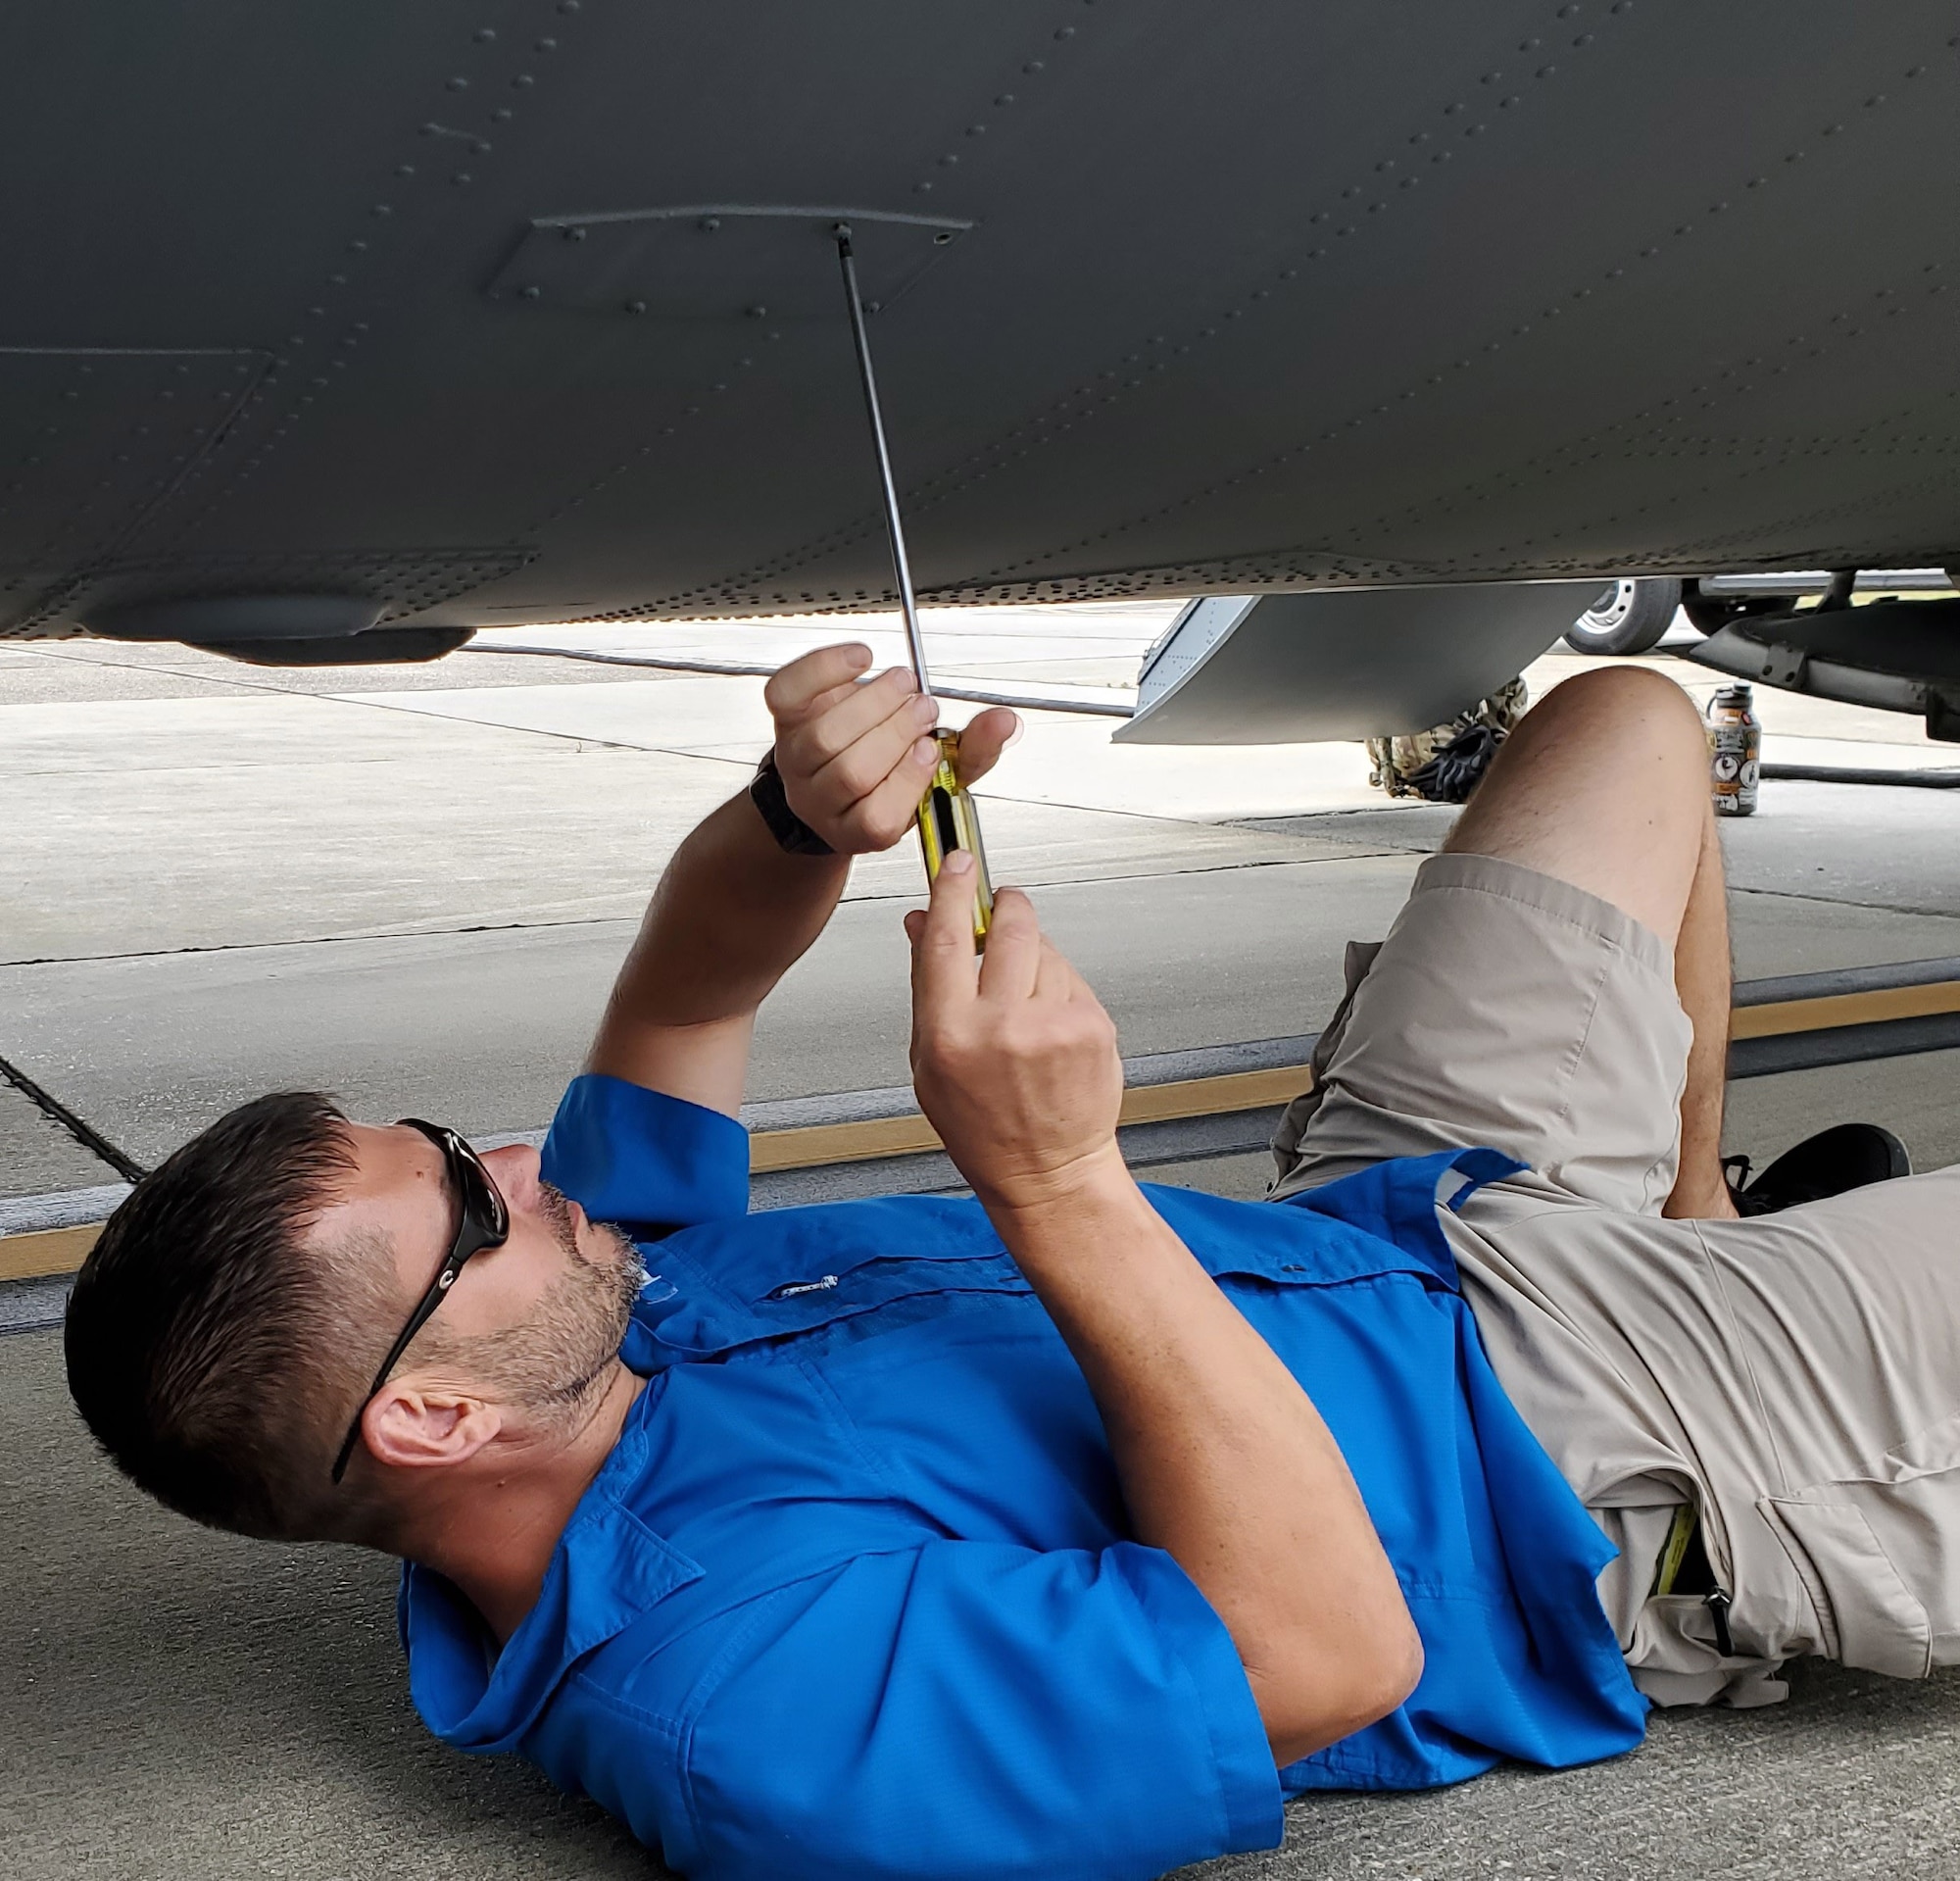 Guy removing part from aircraft at Keesler AFB